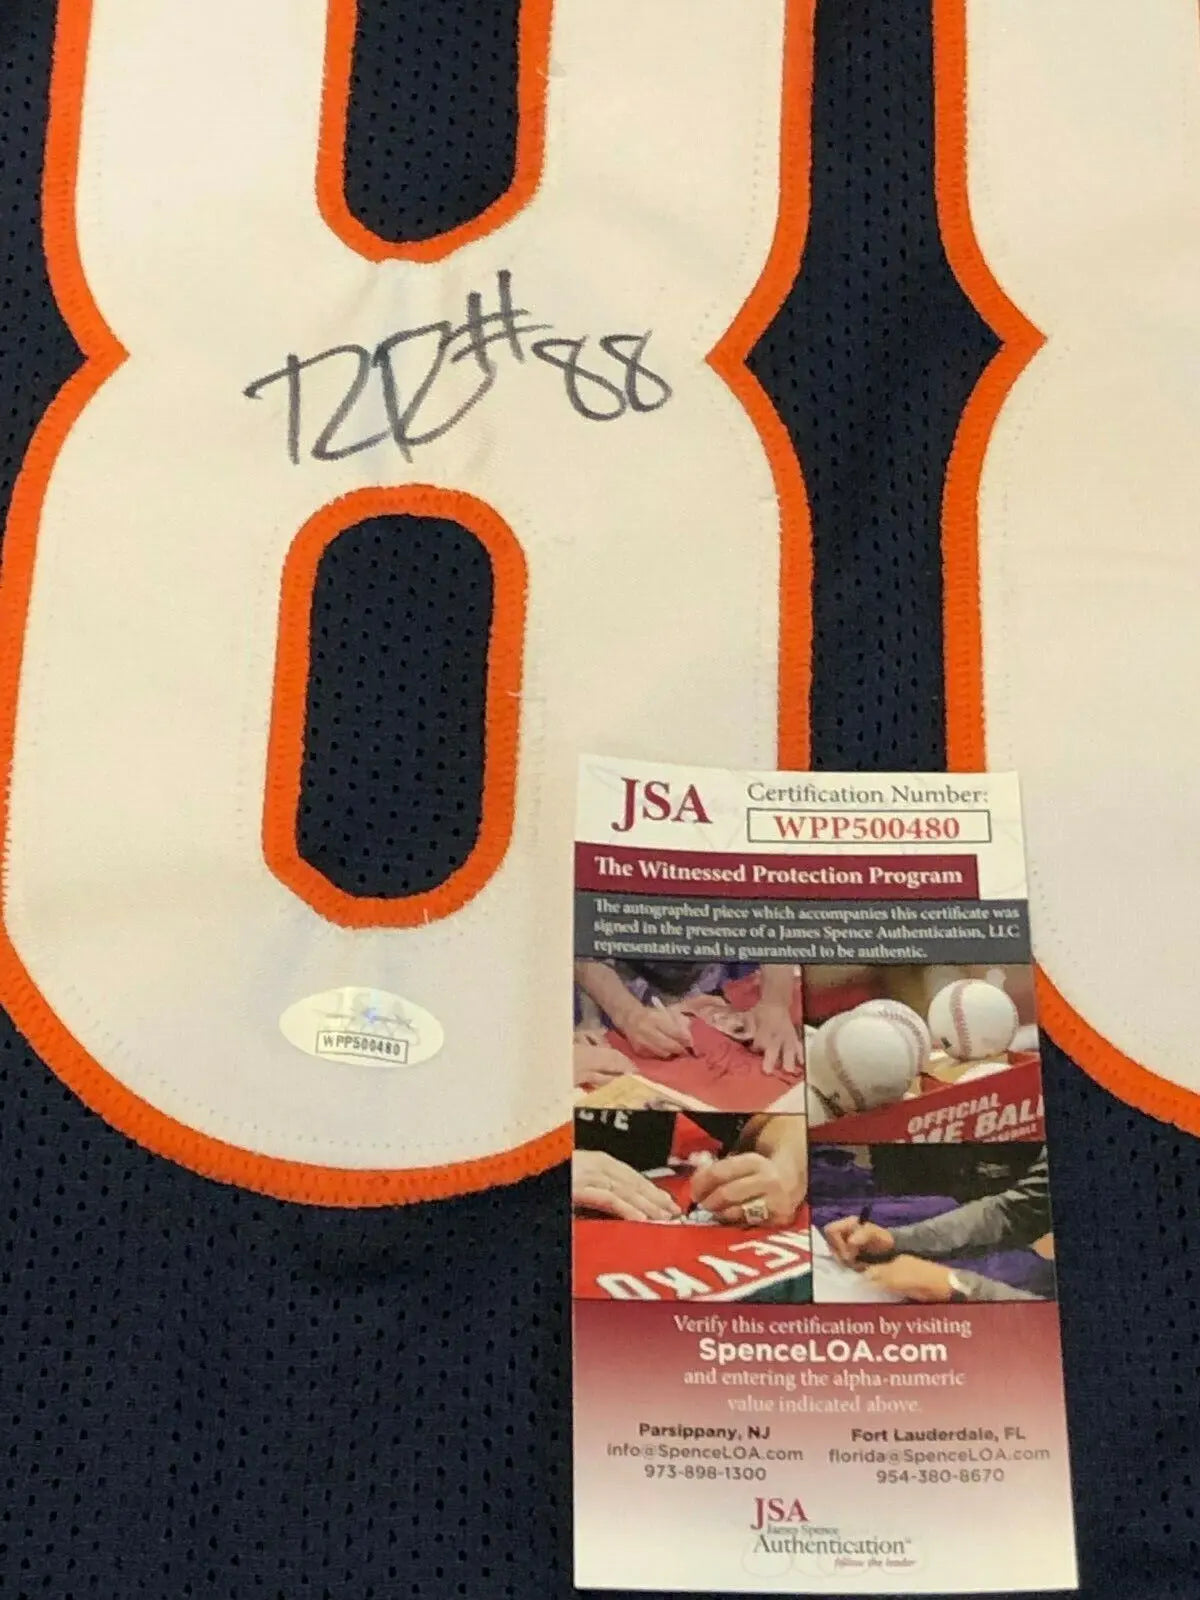 MVP Authentics Chicago Bears Riley Ridley Autographed Signed Jersey Jsa Coa 107.10 sports jersey framing , jersey framing